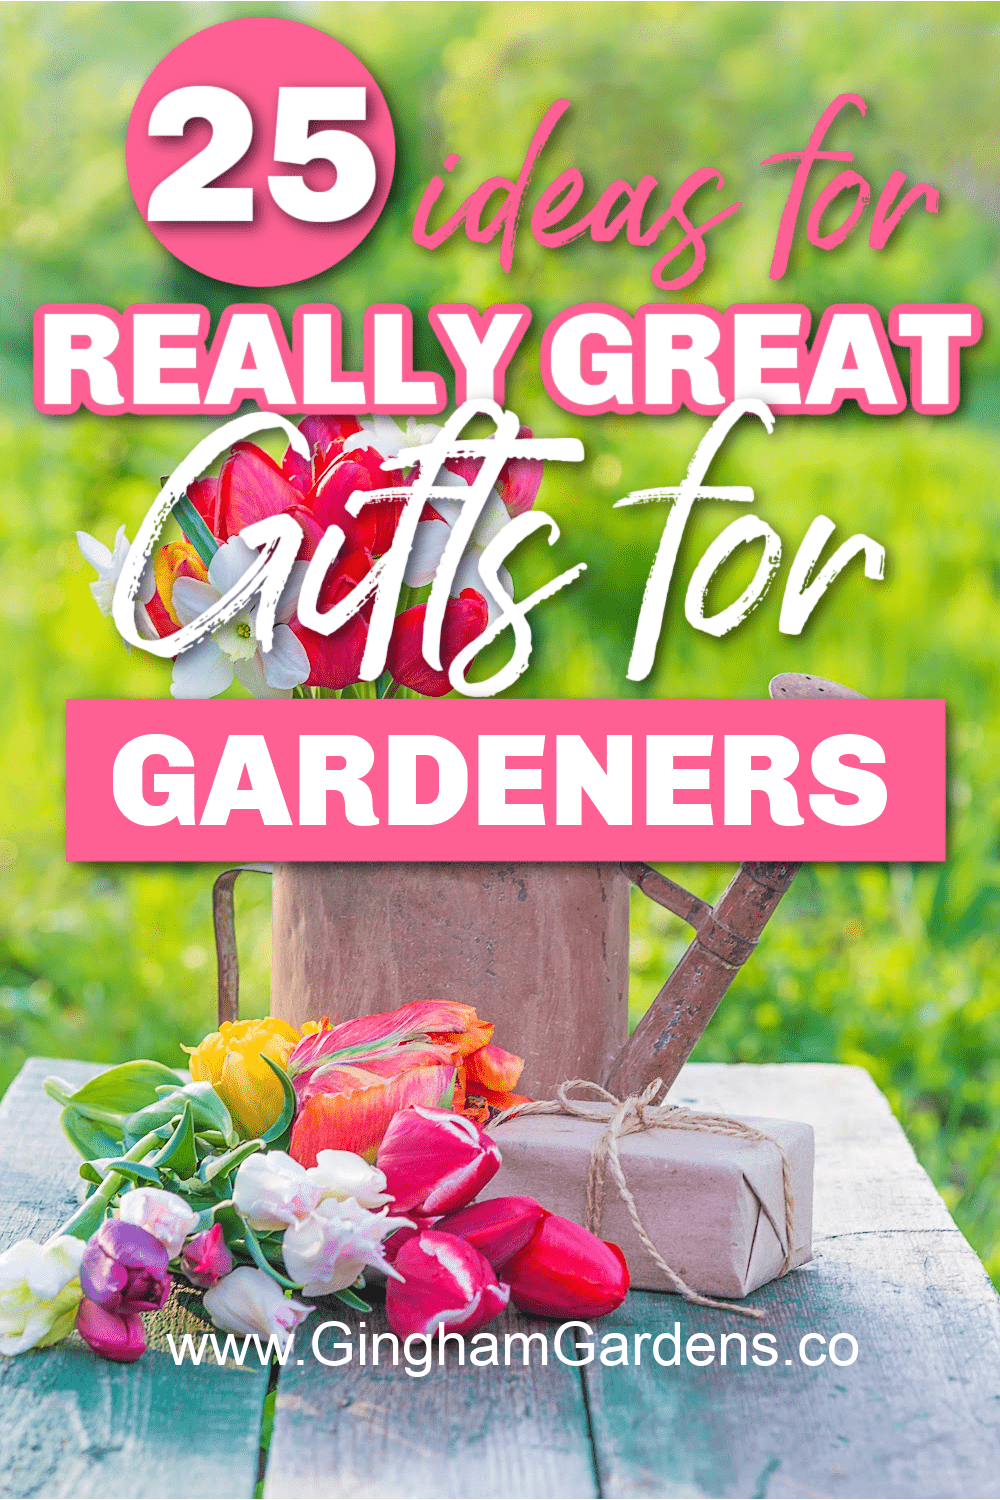 Image of a grouping of flowers in a watering can and a gift with text overlay - 25 really great Gifts for Gardeners